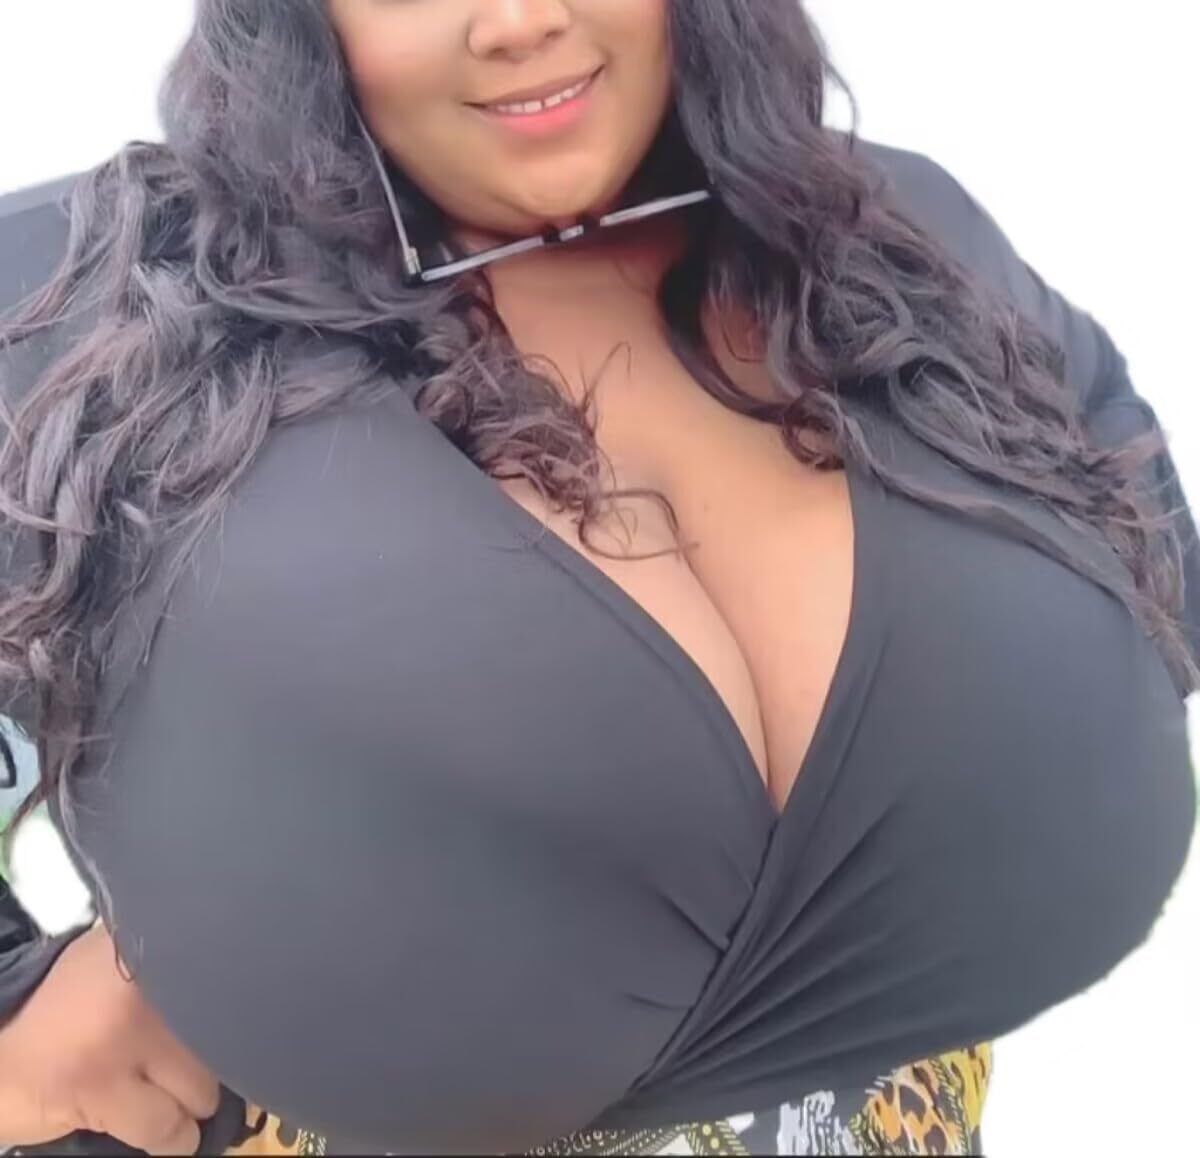 chandra mcginnis recommends crossdresser with big boobs pic